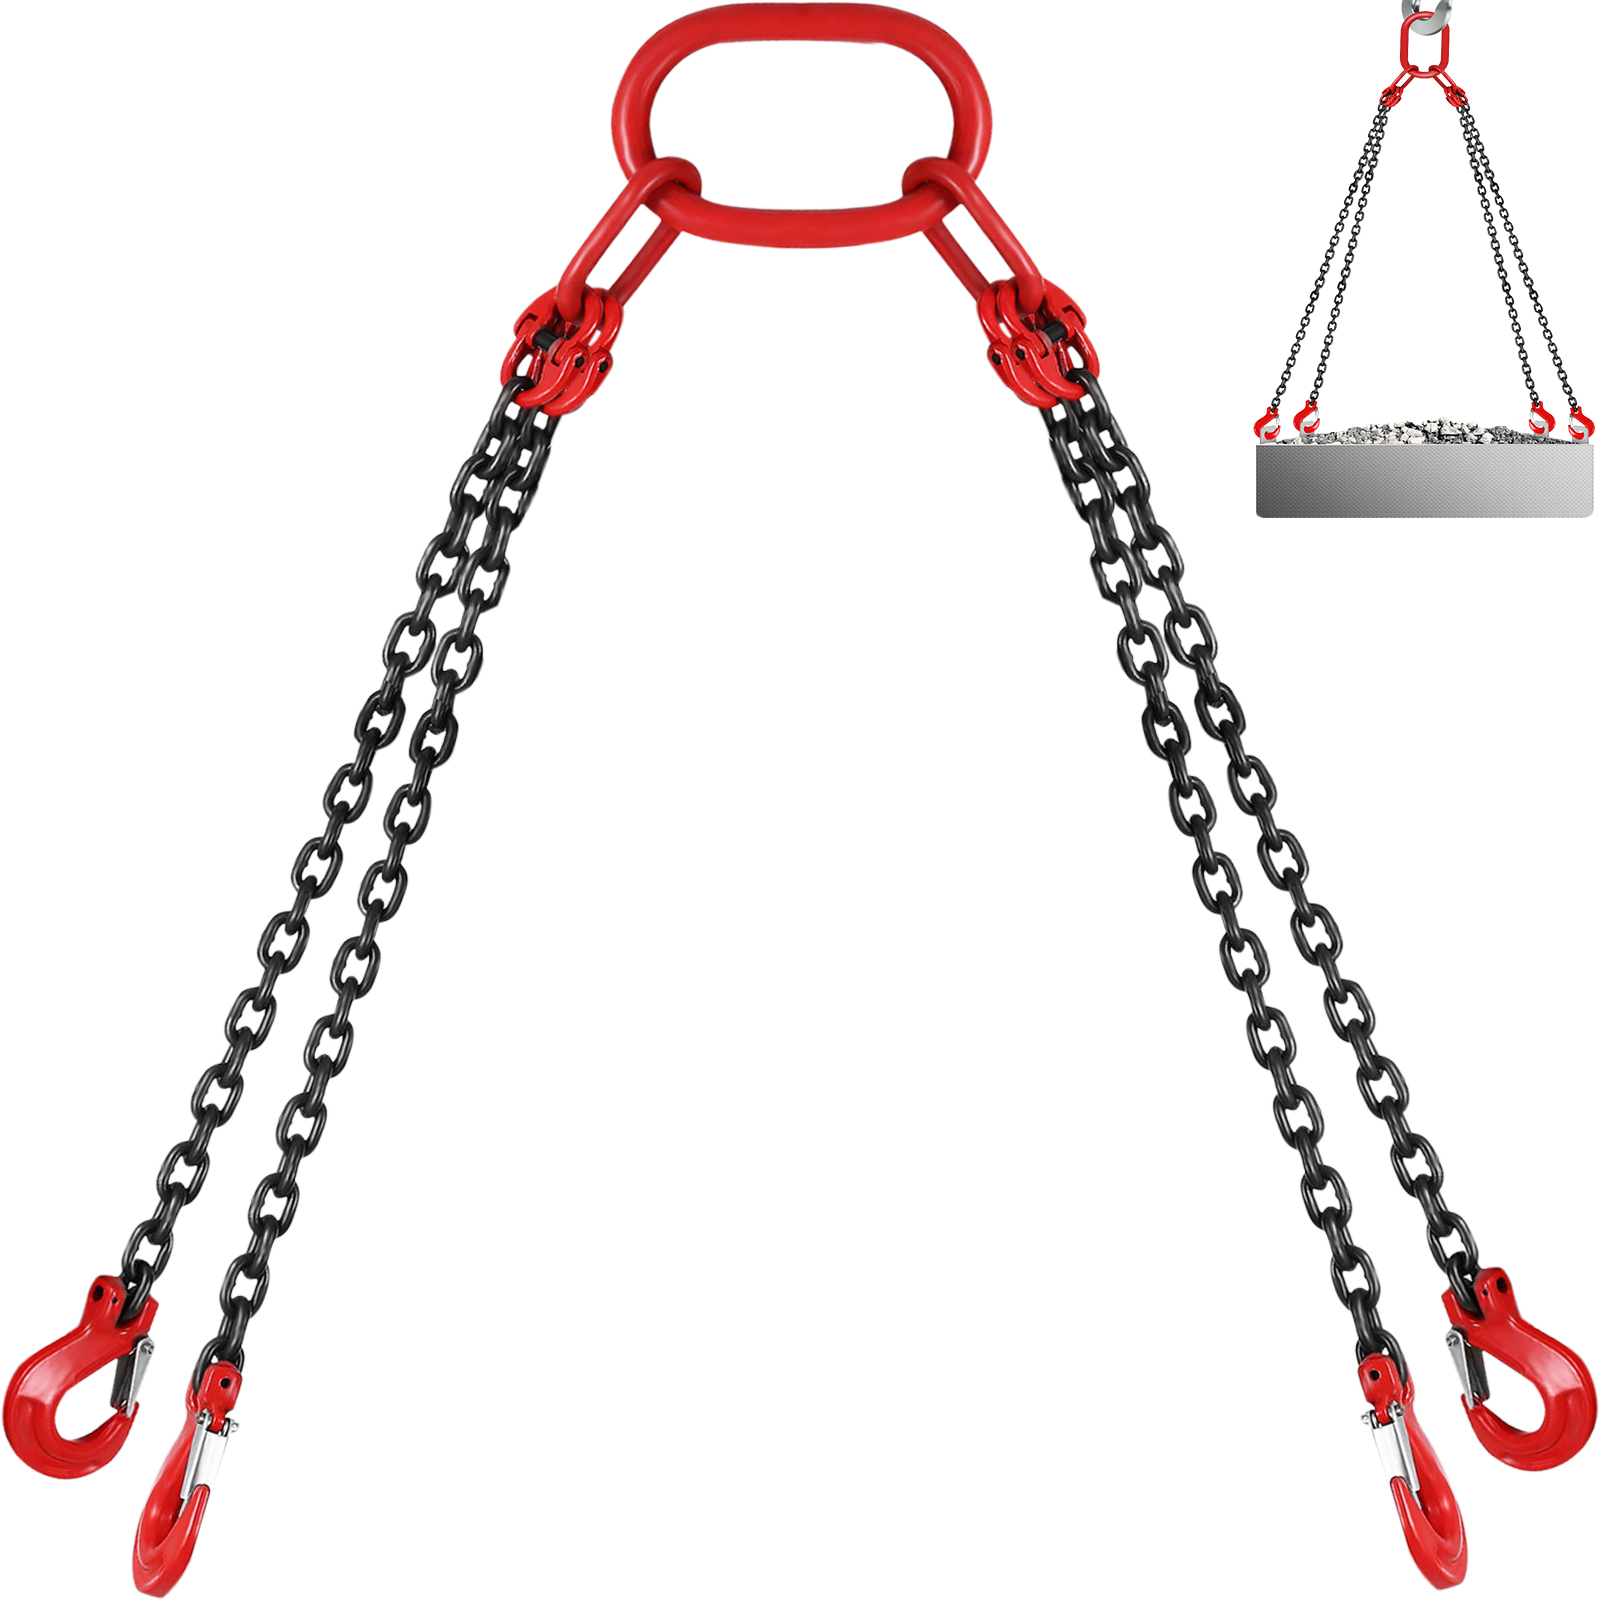 Happybuy 5ft Chain Sling 516 inch x 5 ft Engine Lift Chain G80 Alloy